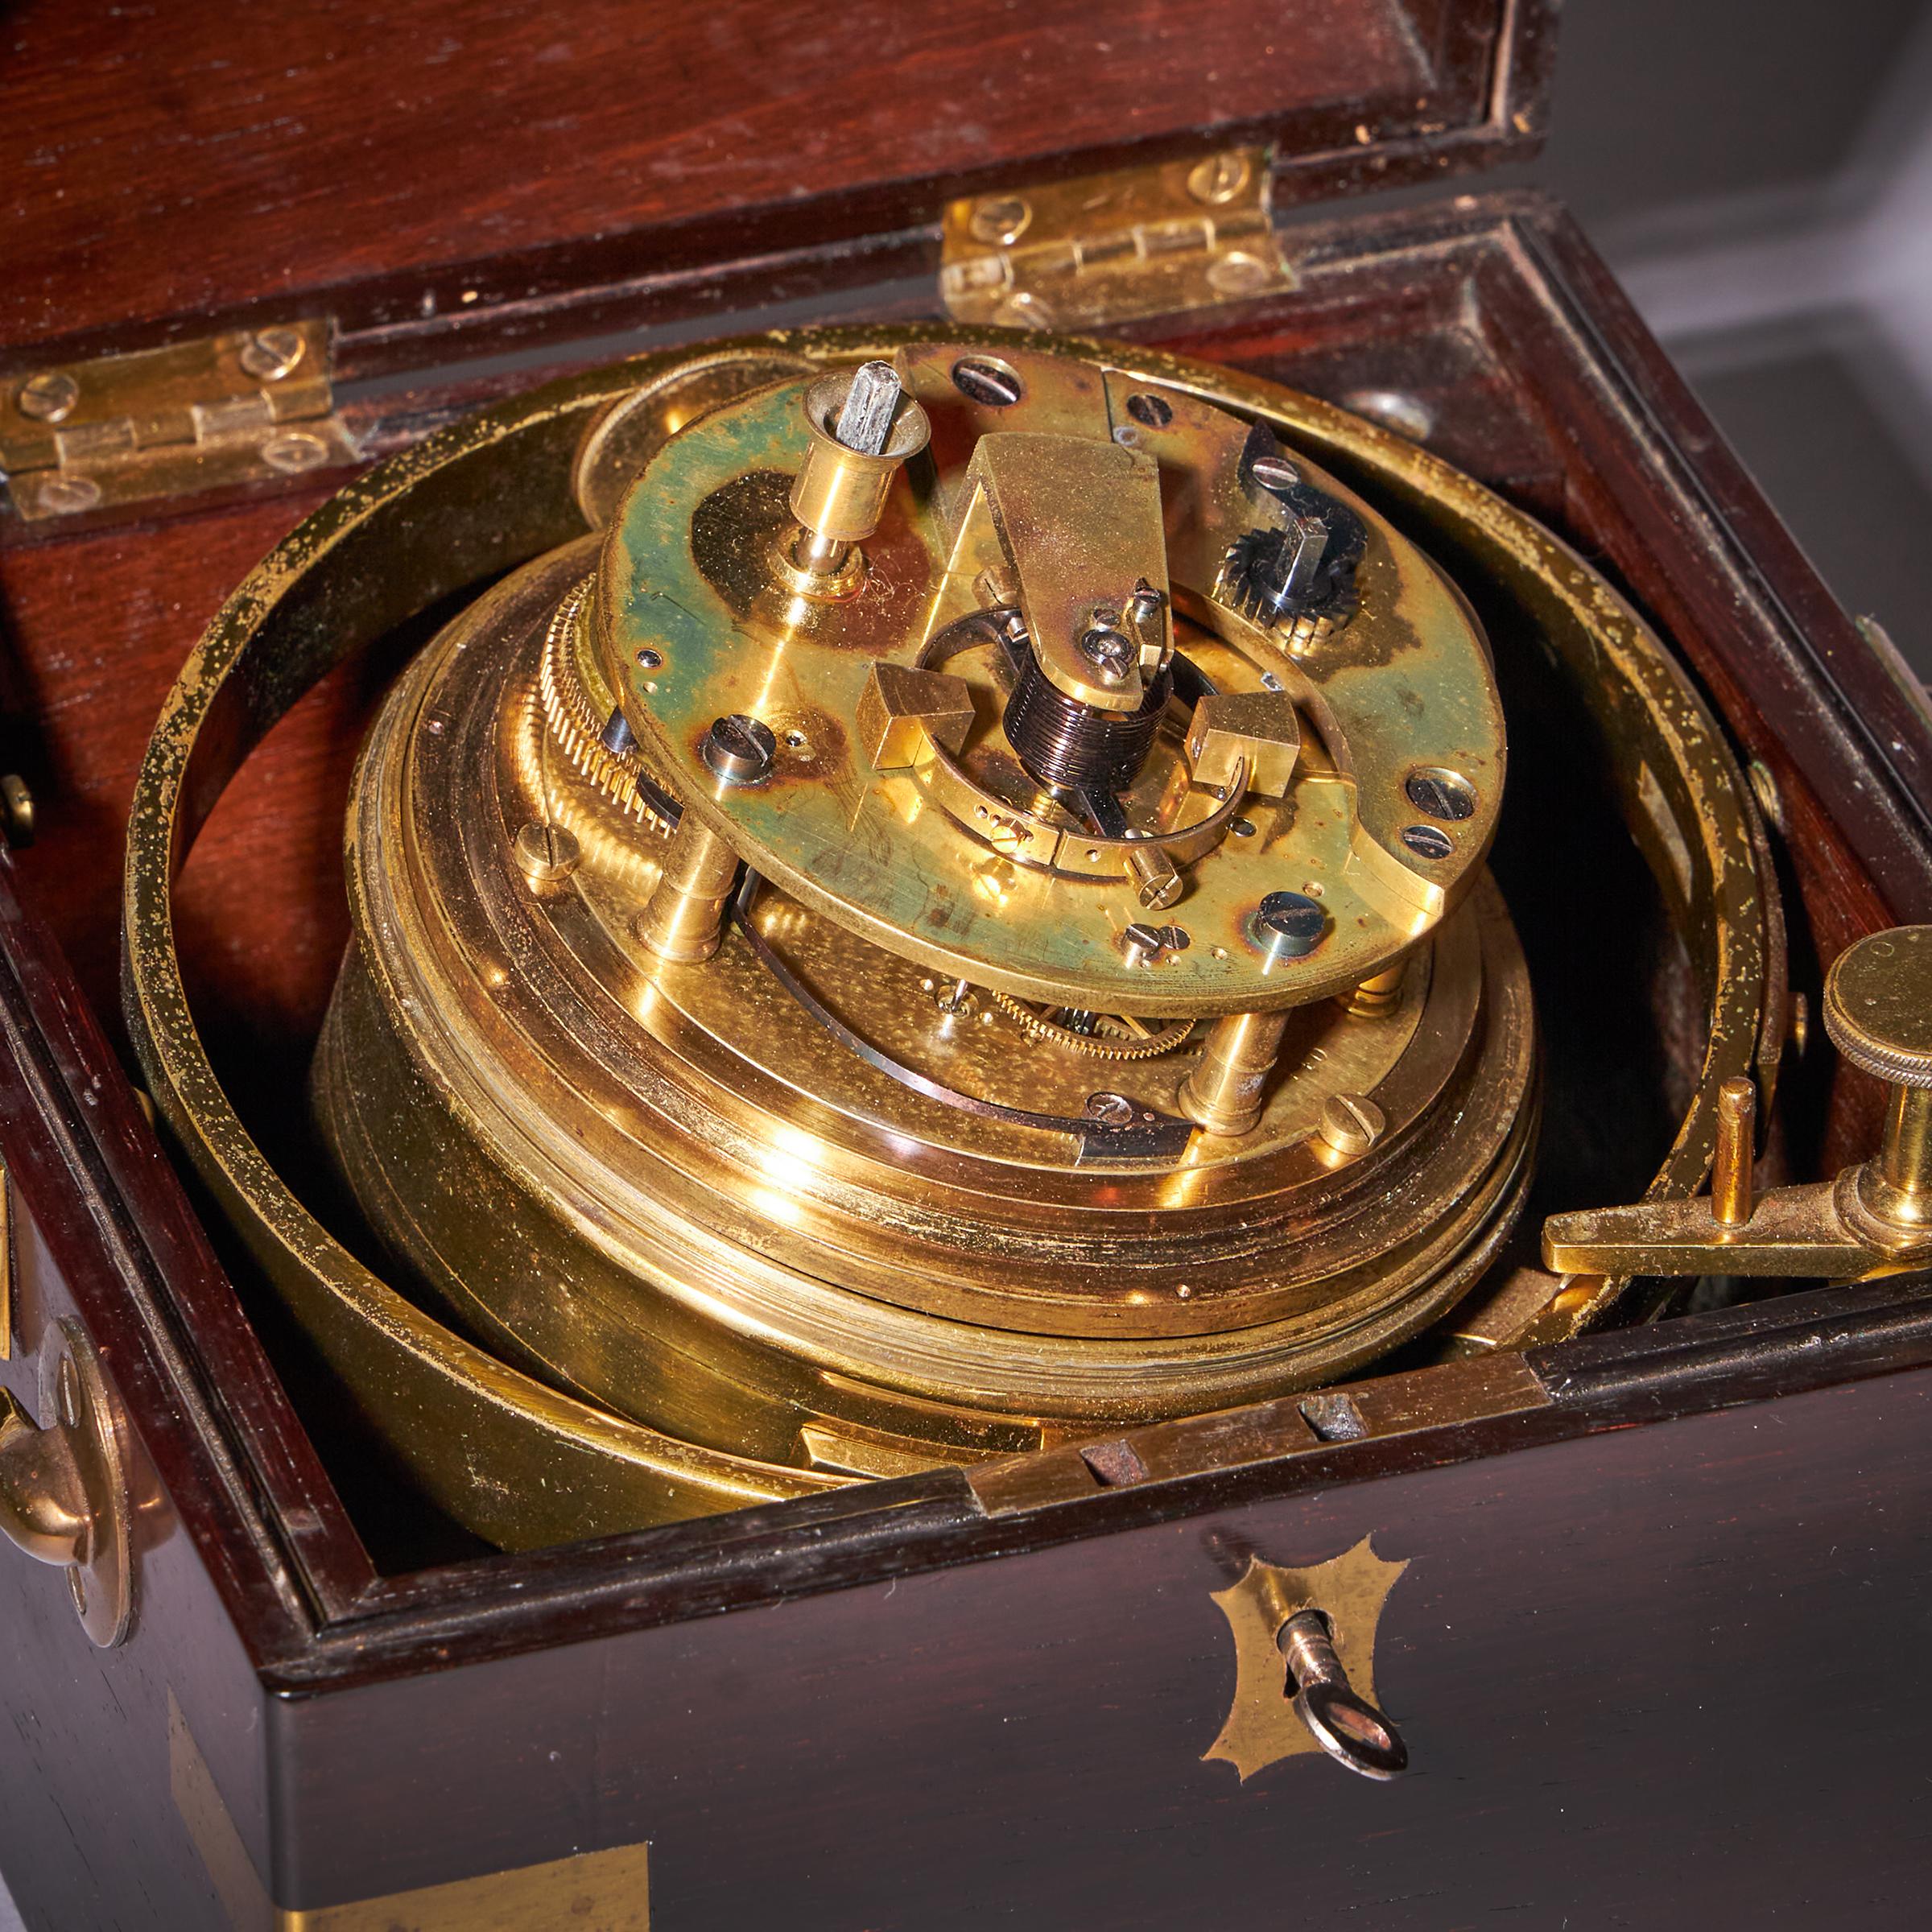 Fine Two-Day Marine Chronometer Signed Charles Frodsham For Sale 2